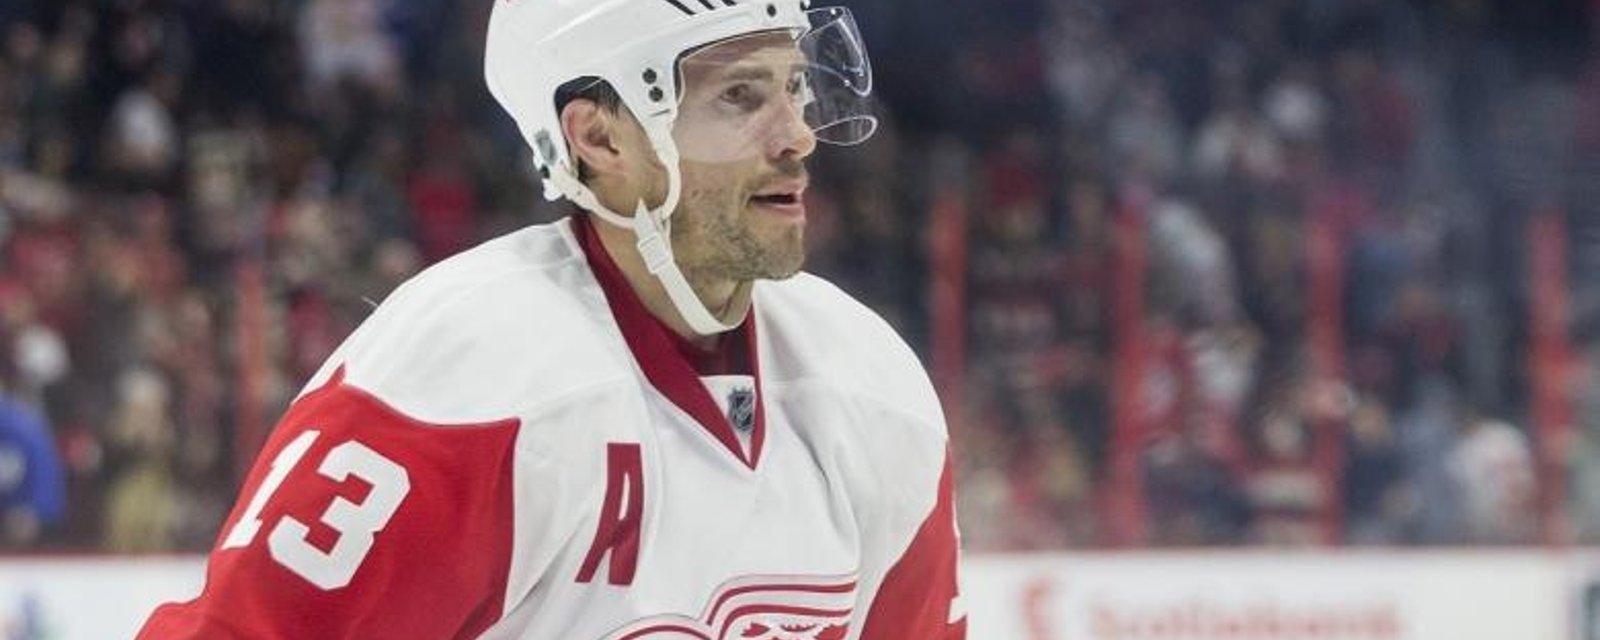 Holland expects to meet with Datsyuk next week.